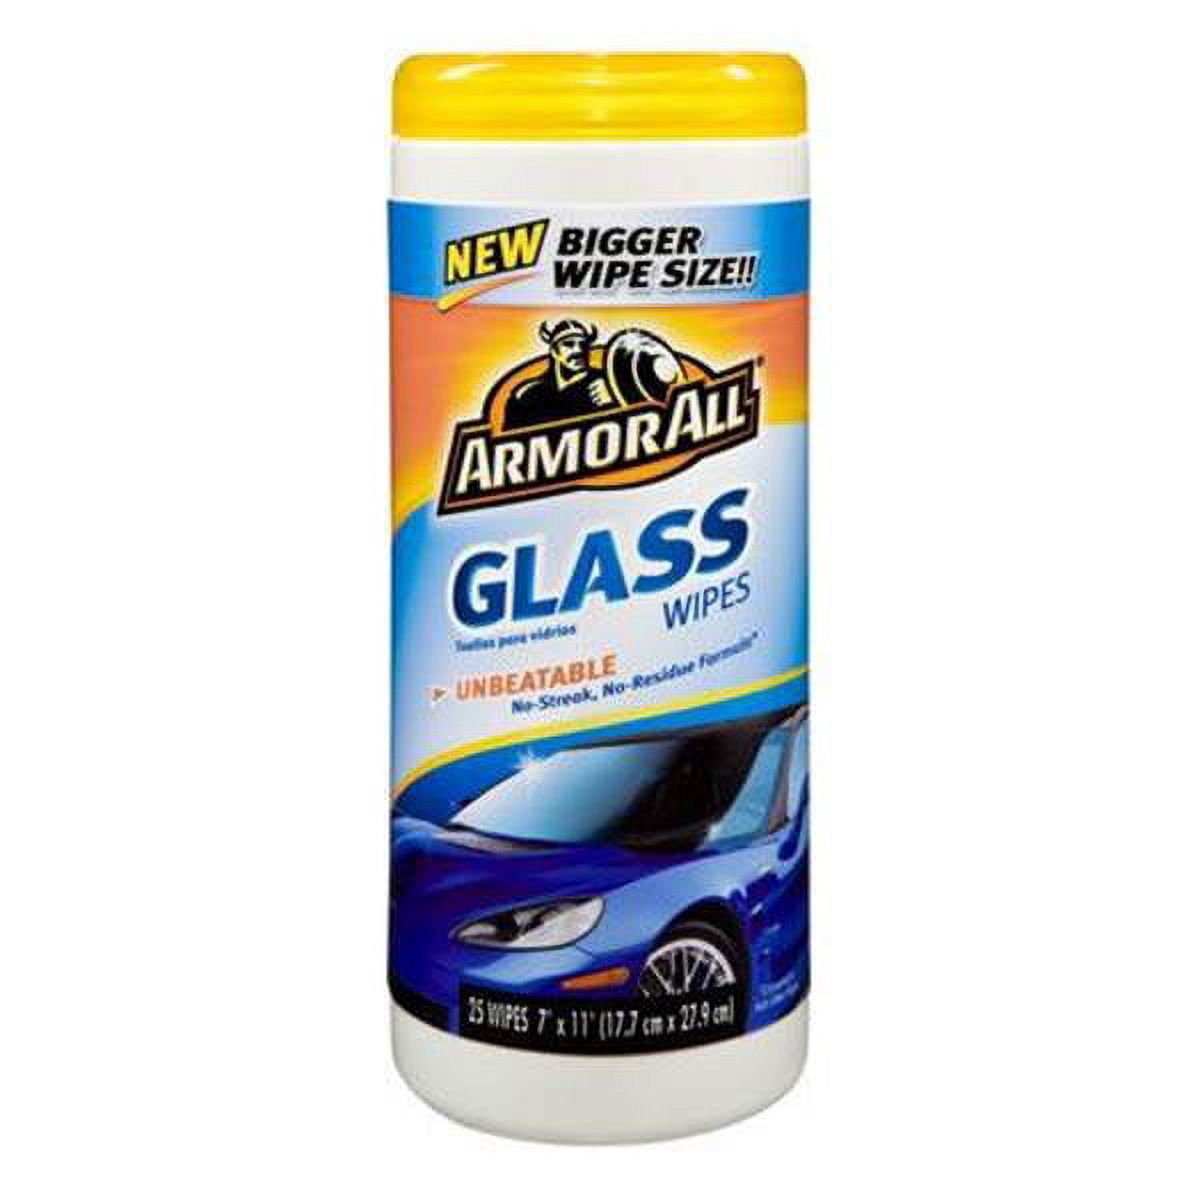 Armor All Glass Wipes (Pack of 10), Size: 30